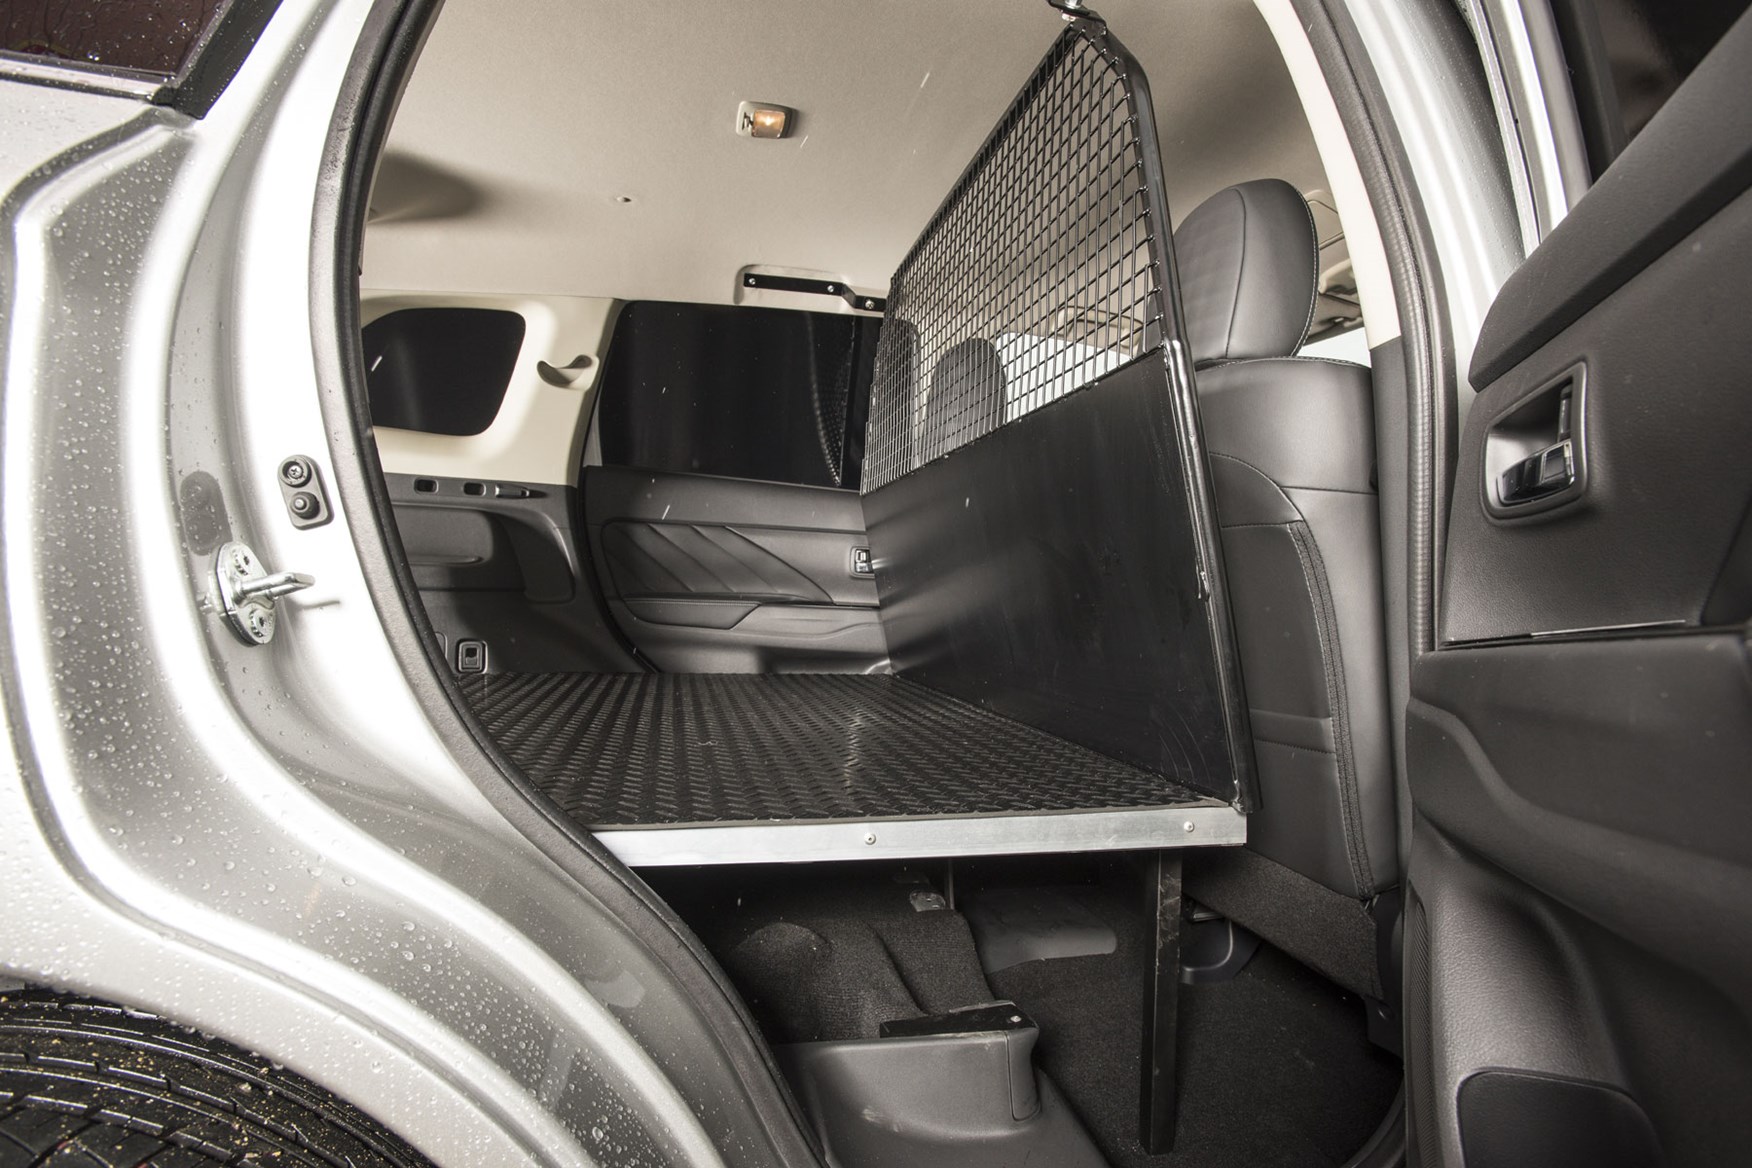 Mitsubishi Outlander Commercial 4x4 - side door opening showing storage under load area